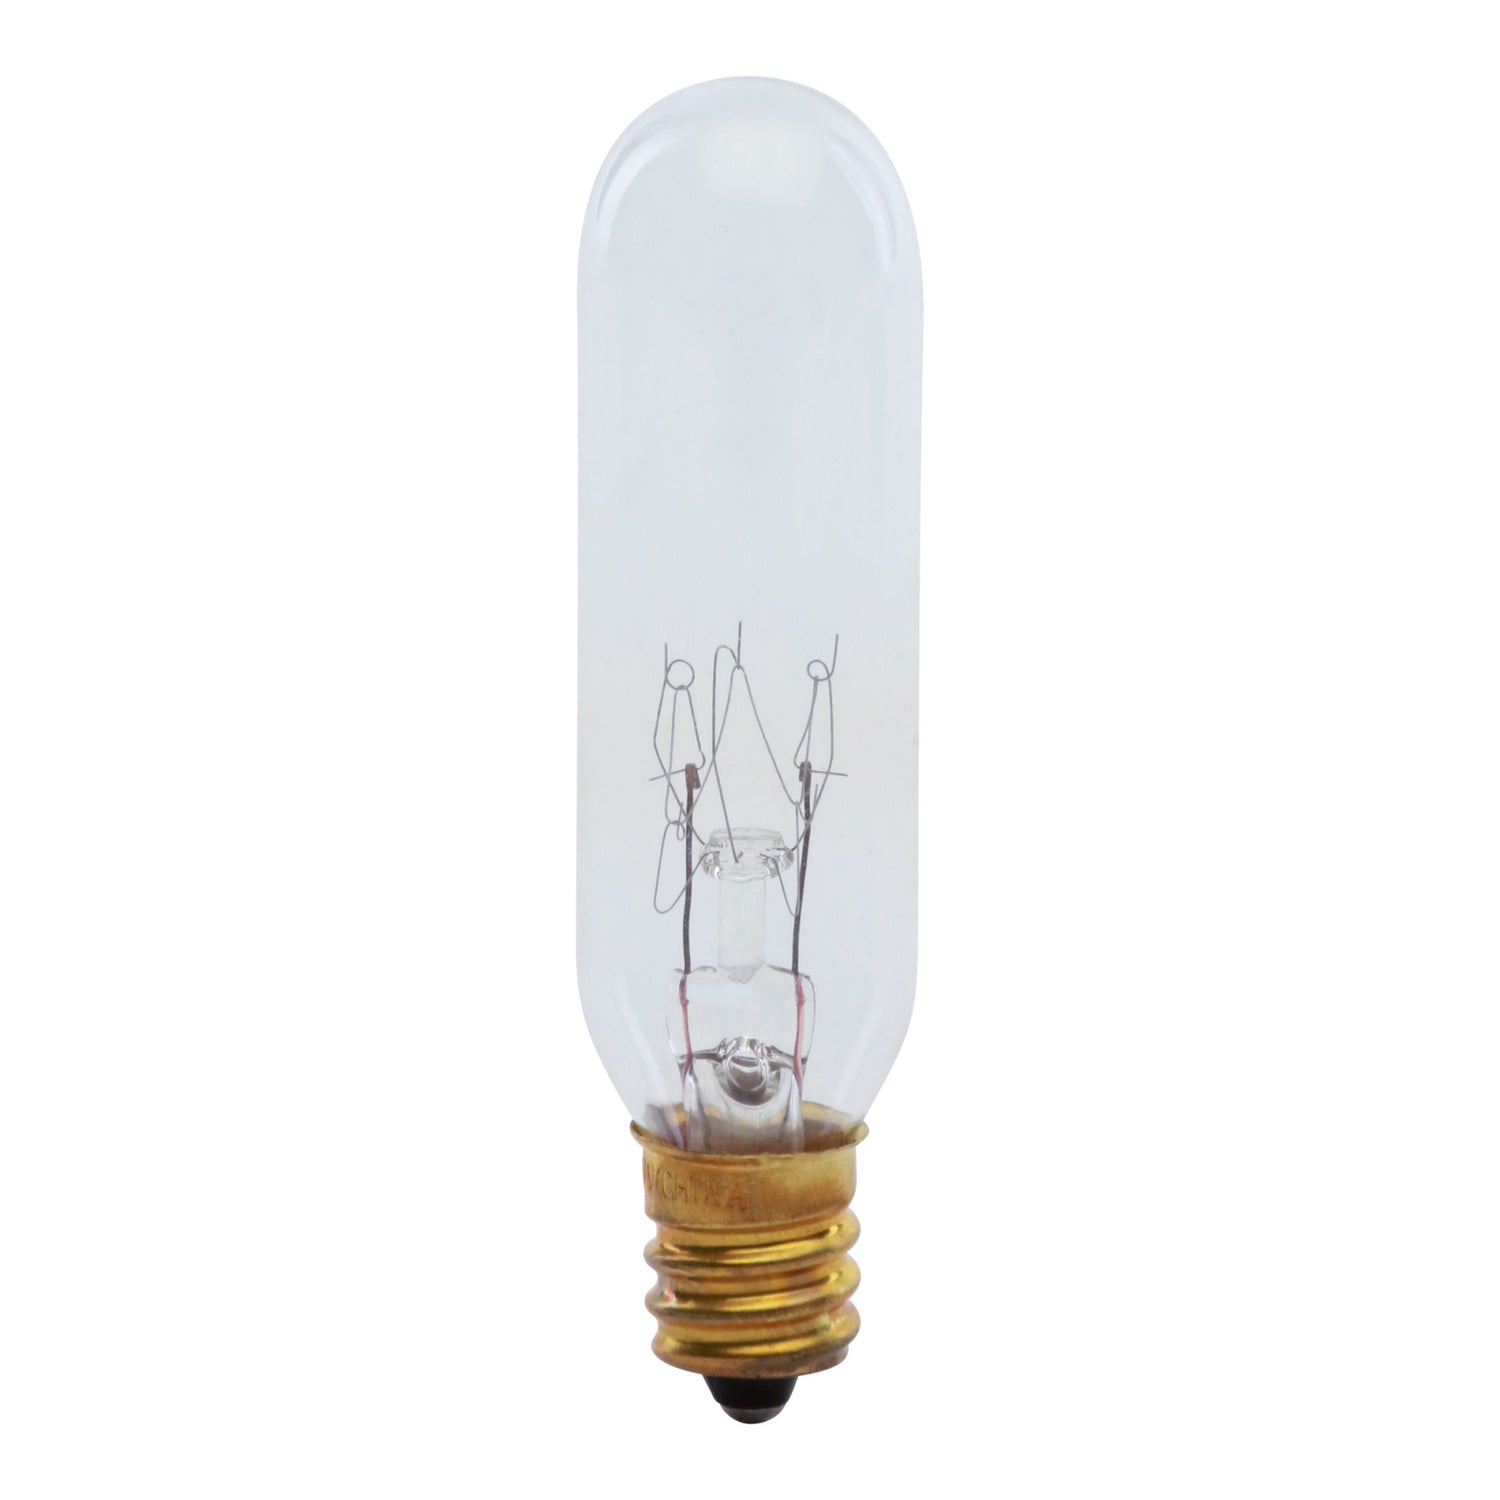 15W Soft White T6 Dimmable Incandescent Light Bulb